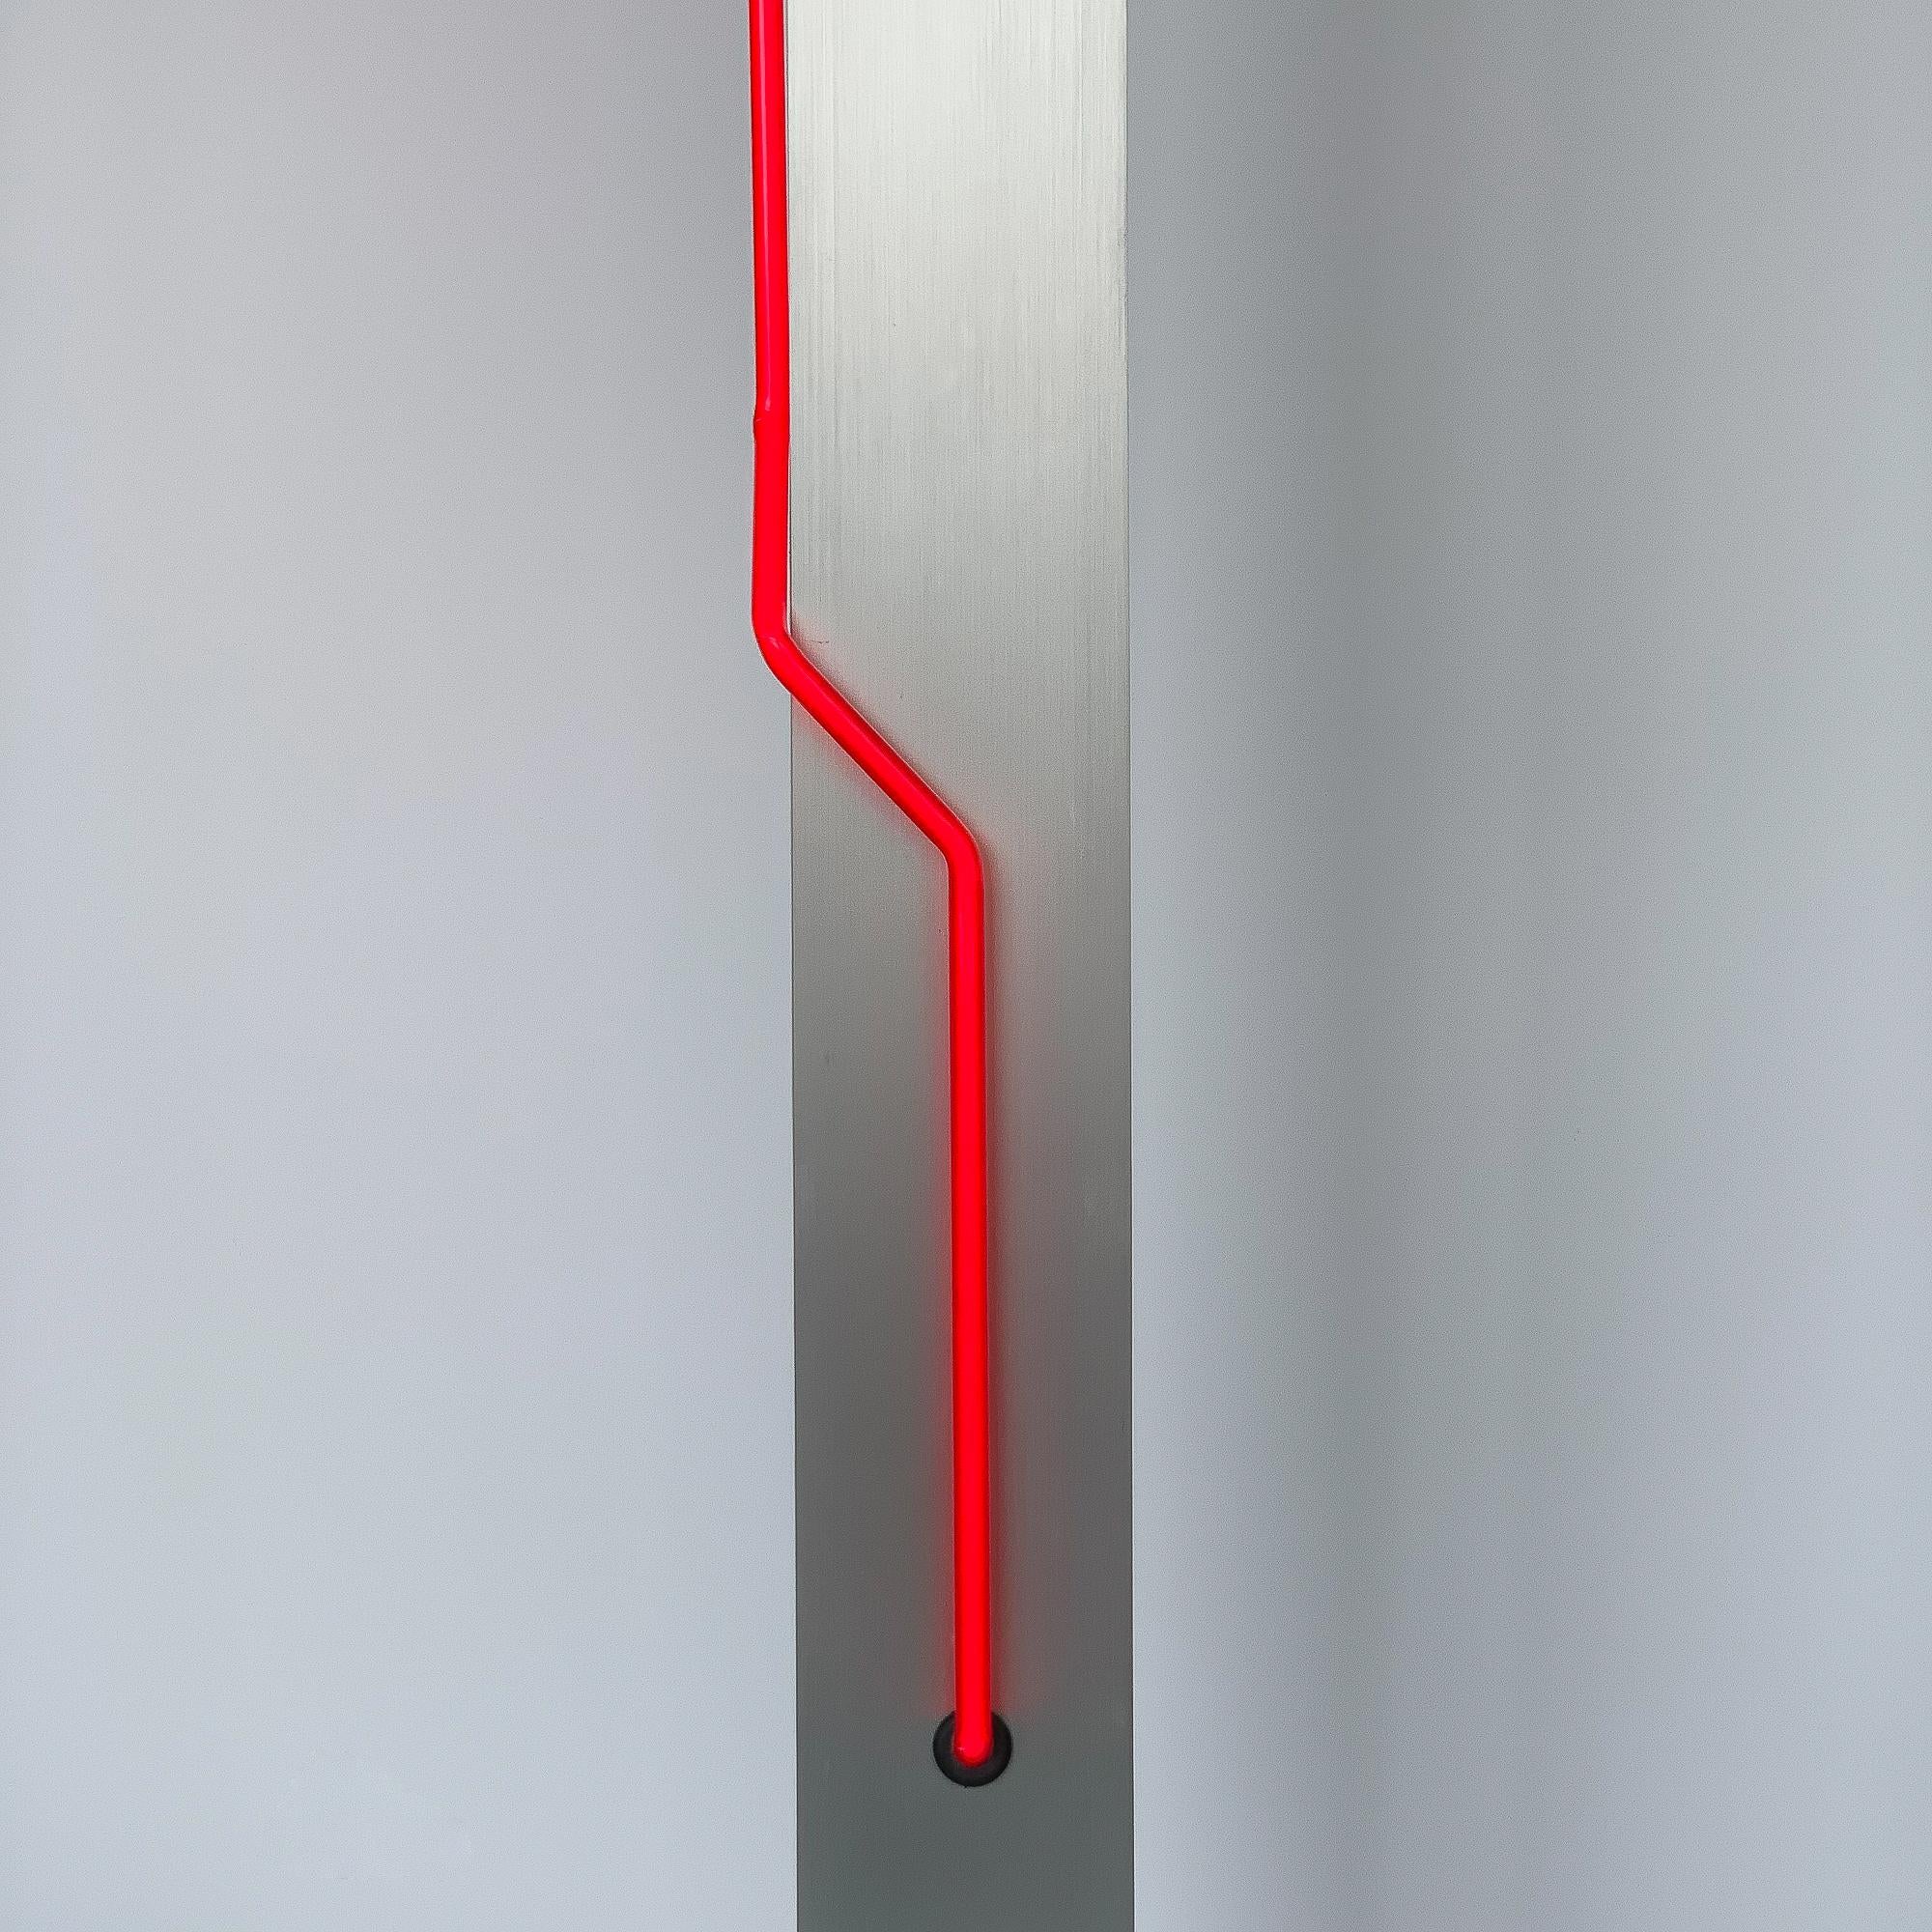 Rare Red Neon and Aluminum Floor Lamp by Rudi Stern and Don Chelsea for Kovacs 4